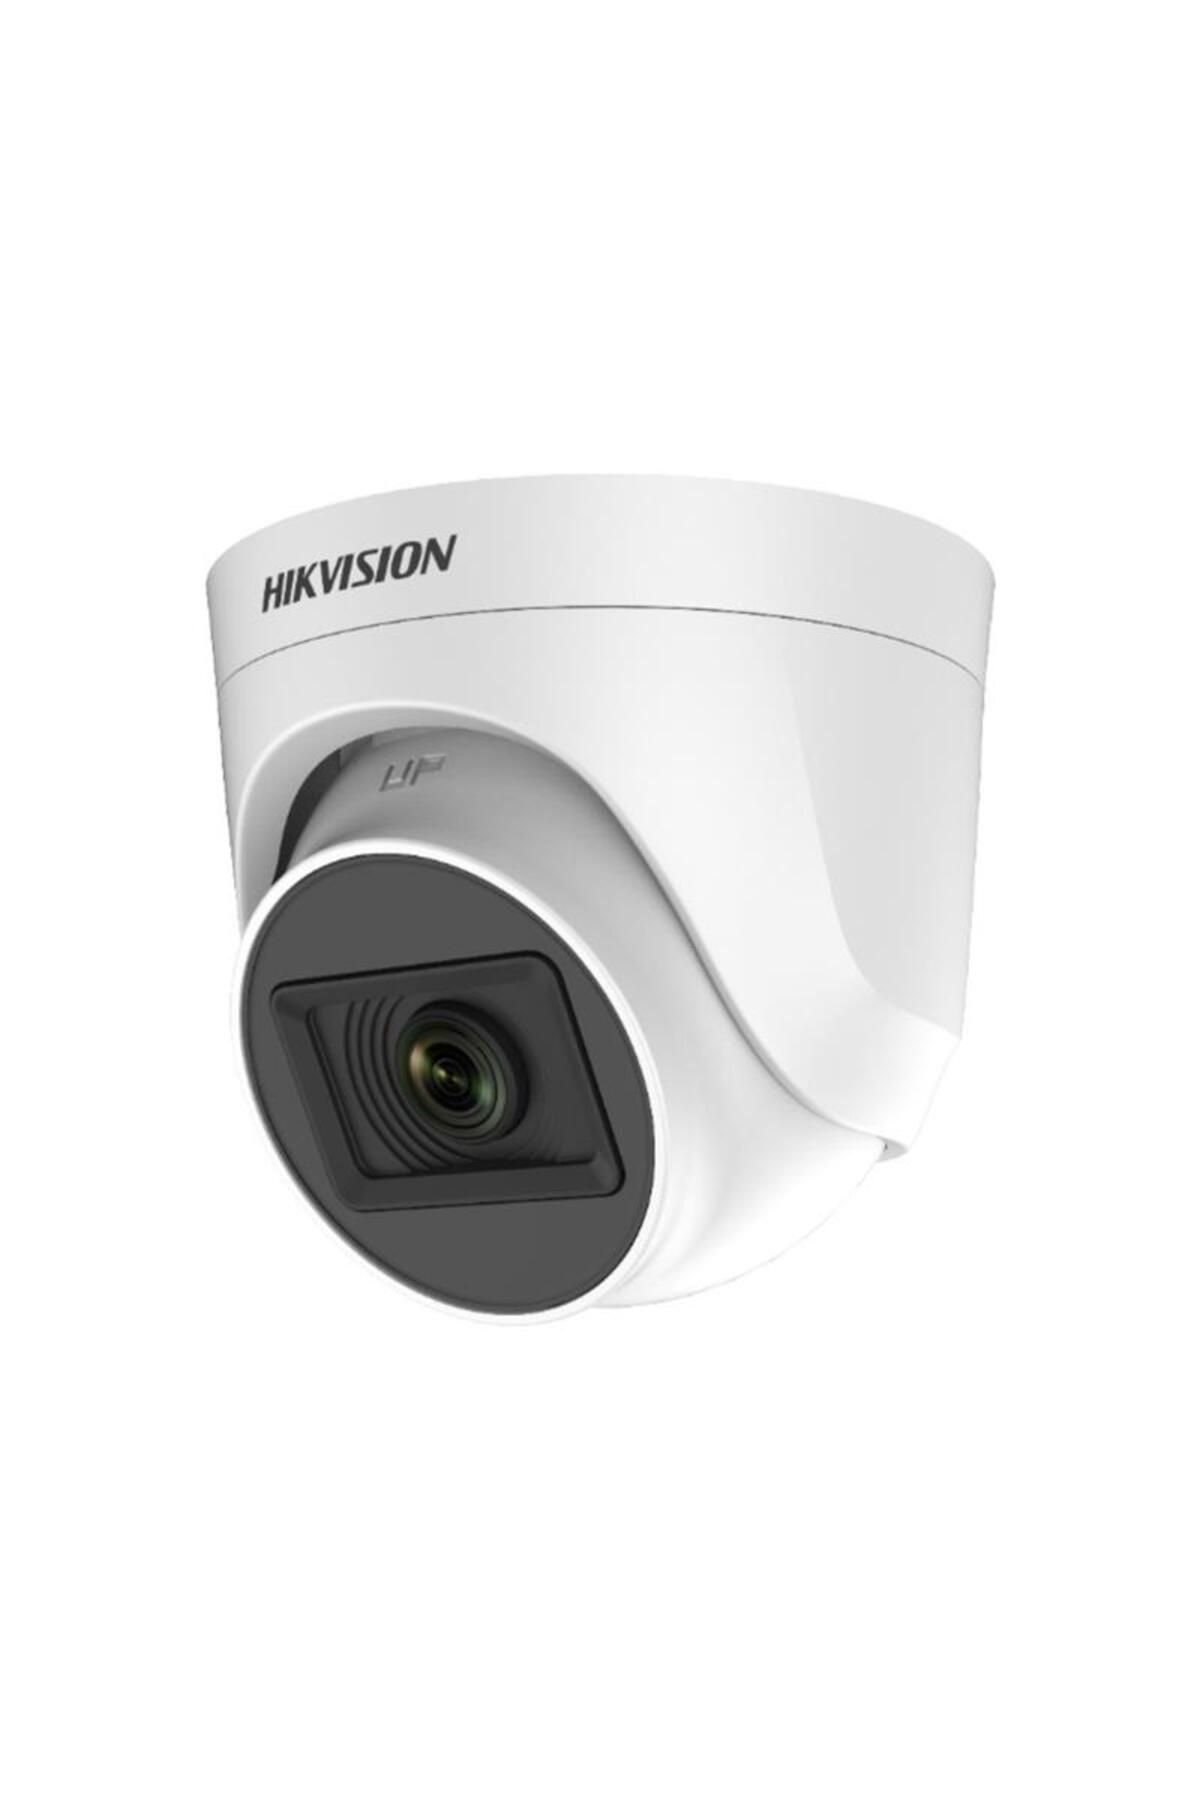 Hikvision DS-2CE76D0T-EXIPF 2MP Analog IR Dome Kamera